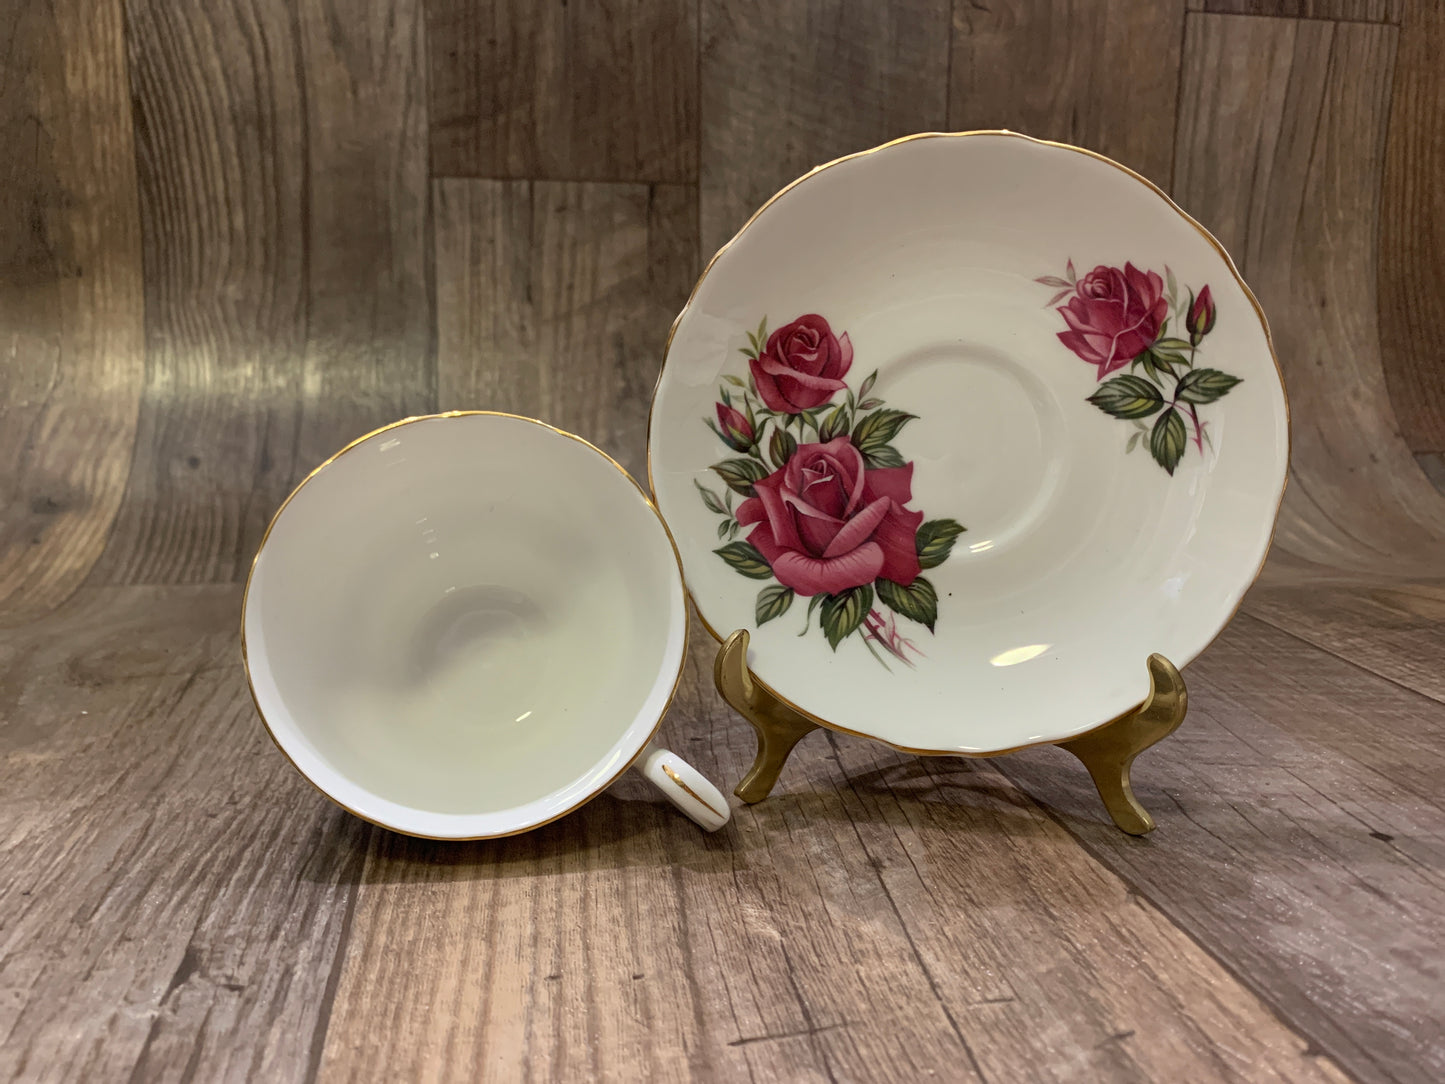 Vintage Tea Cup with Red Roses Staffordshire White Teacup with Red Roses